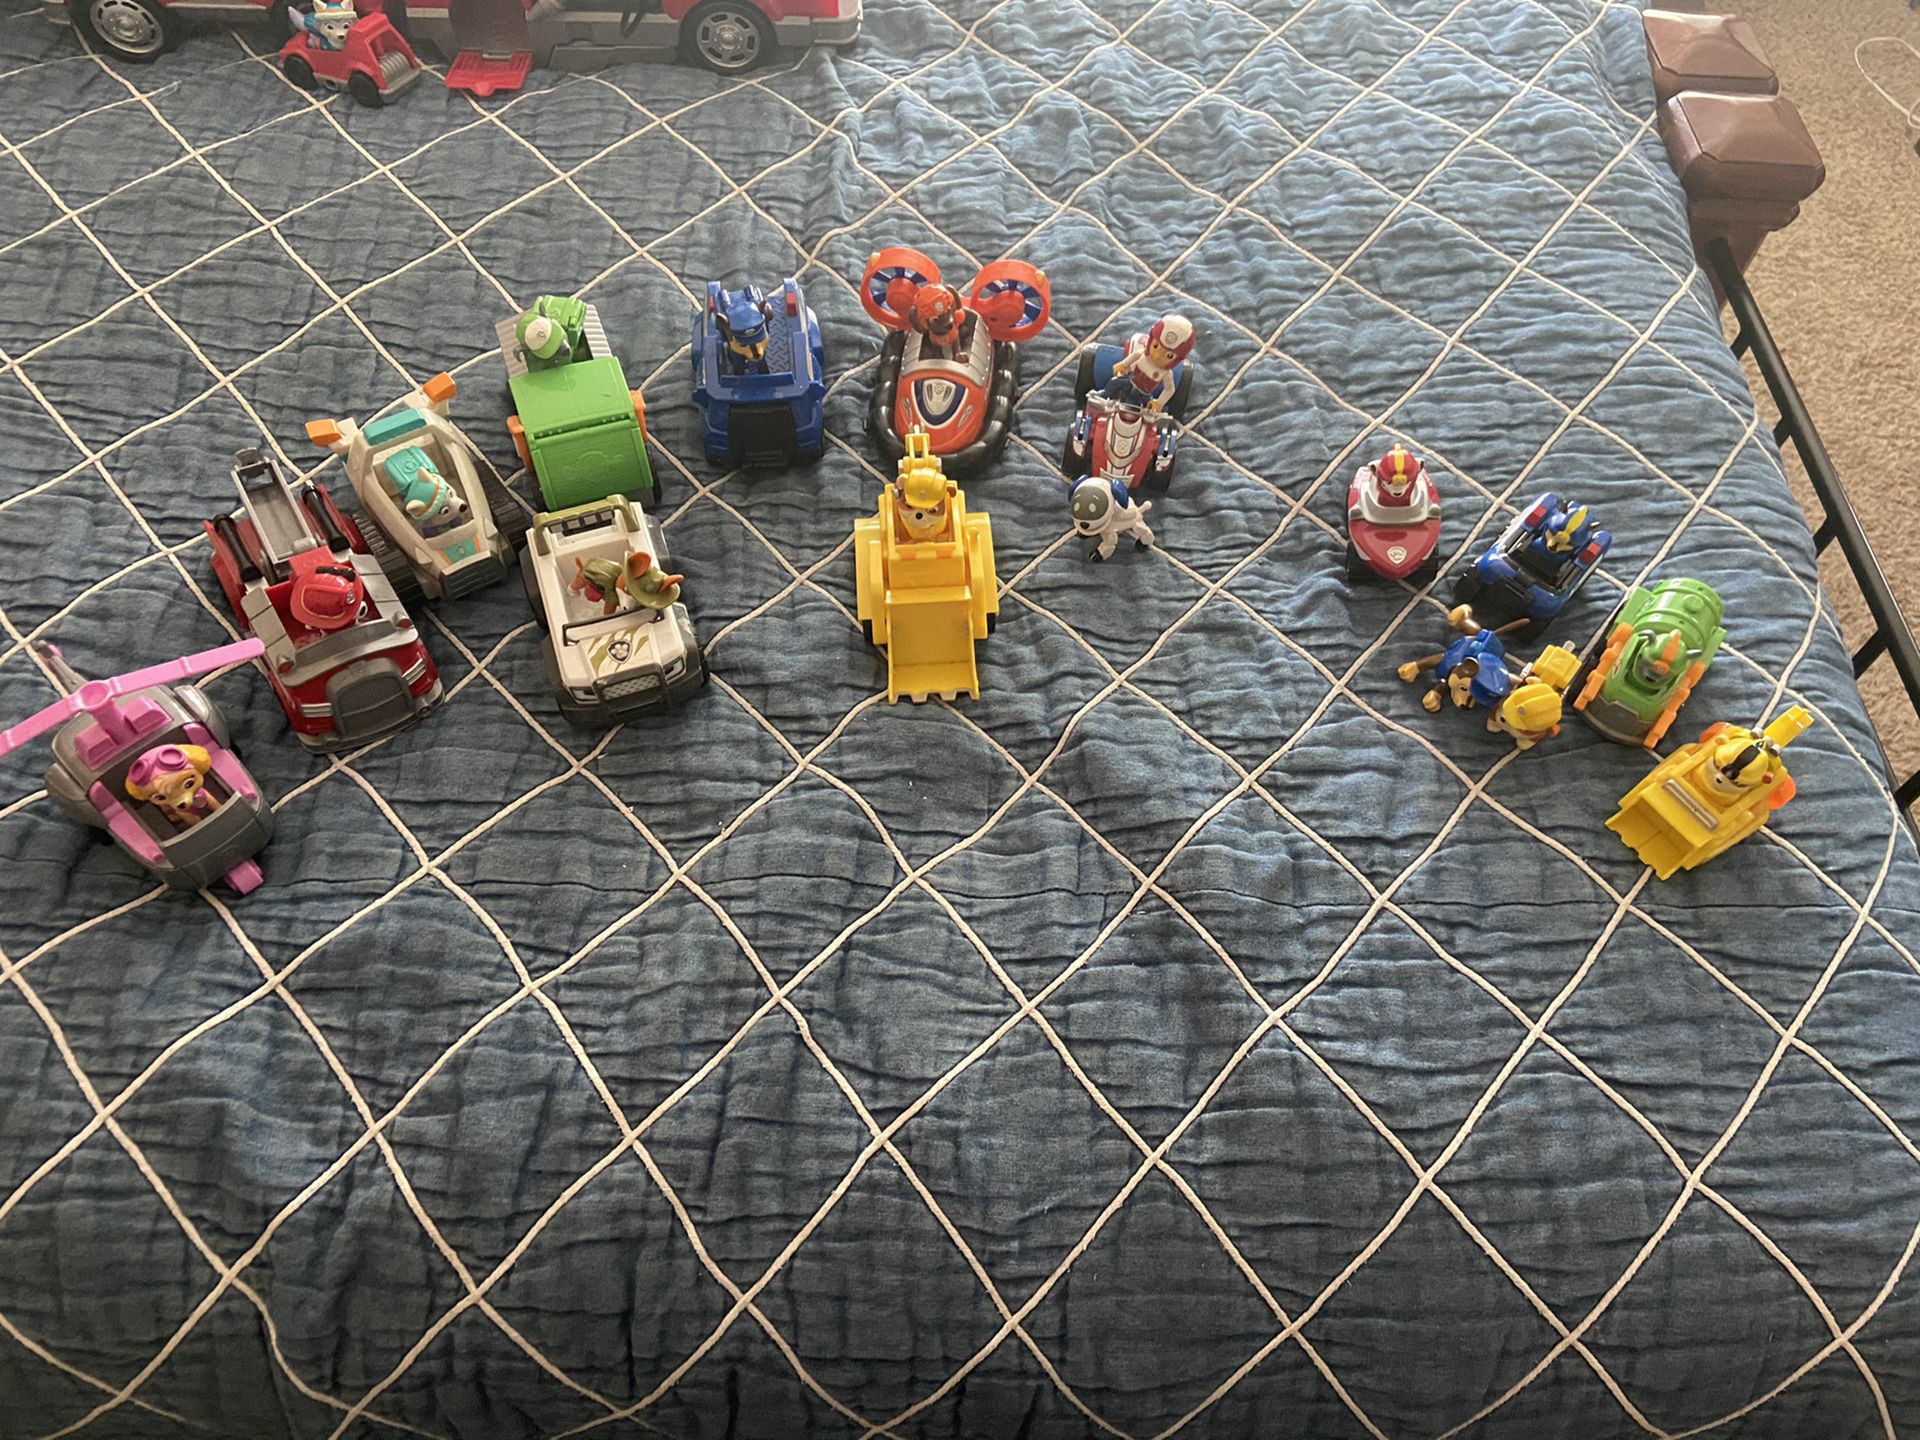 Paw patrol original characters vehicles and extras. With backpack